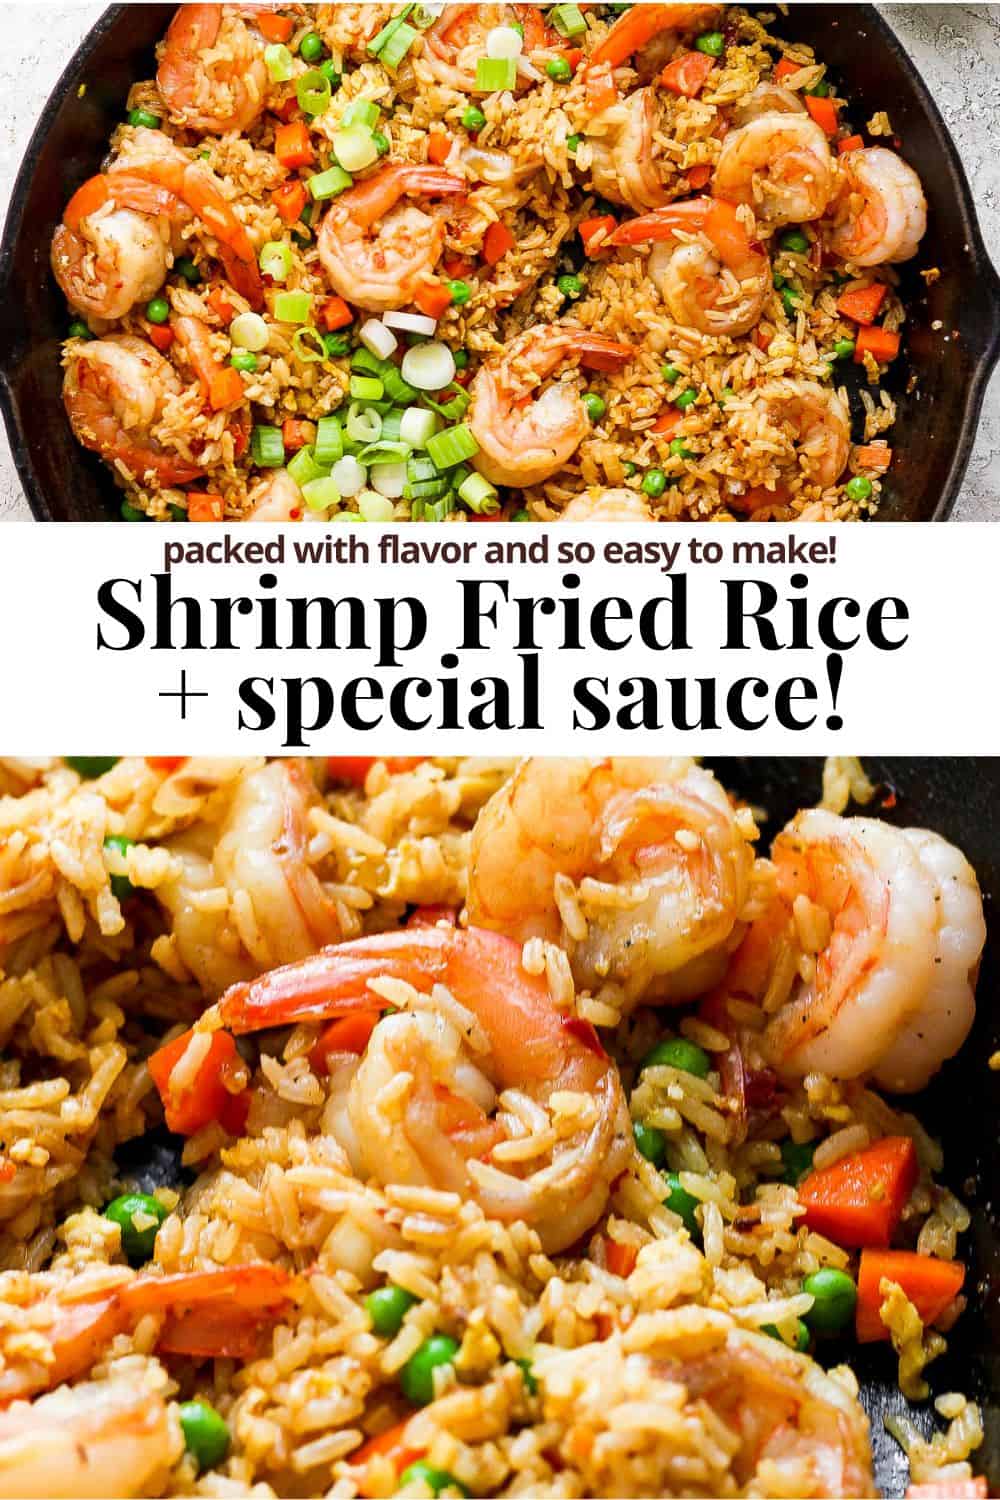 Pinterest image showing shrimp fried rice in a skillet with the title "shrimp fried rice + special sauce! Packed with flavor and so easy to make!"